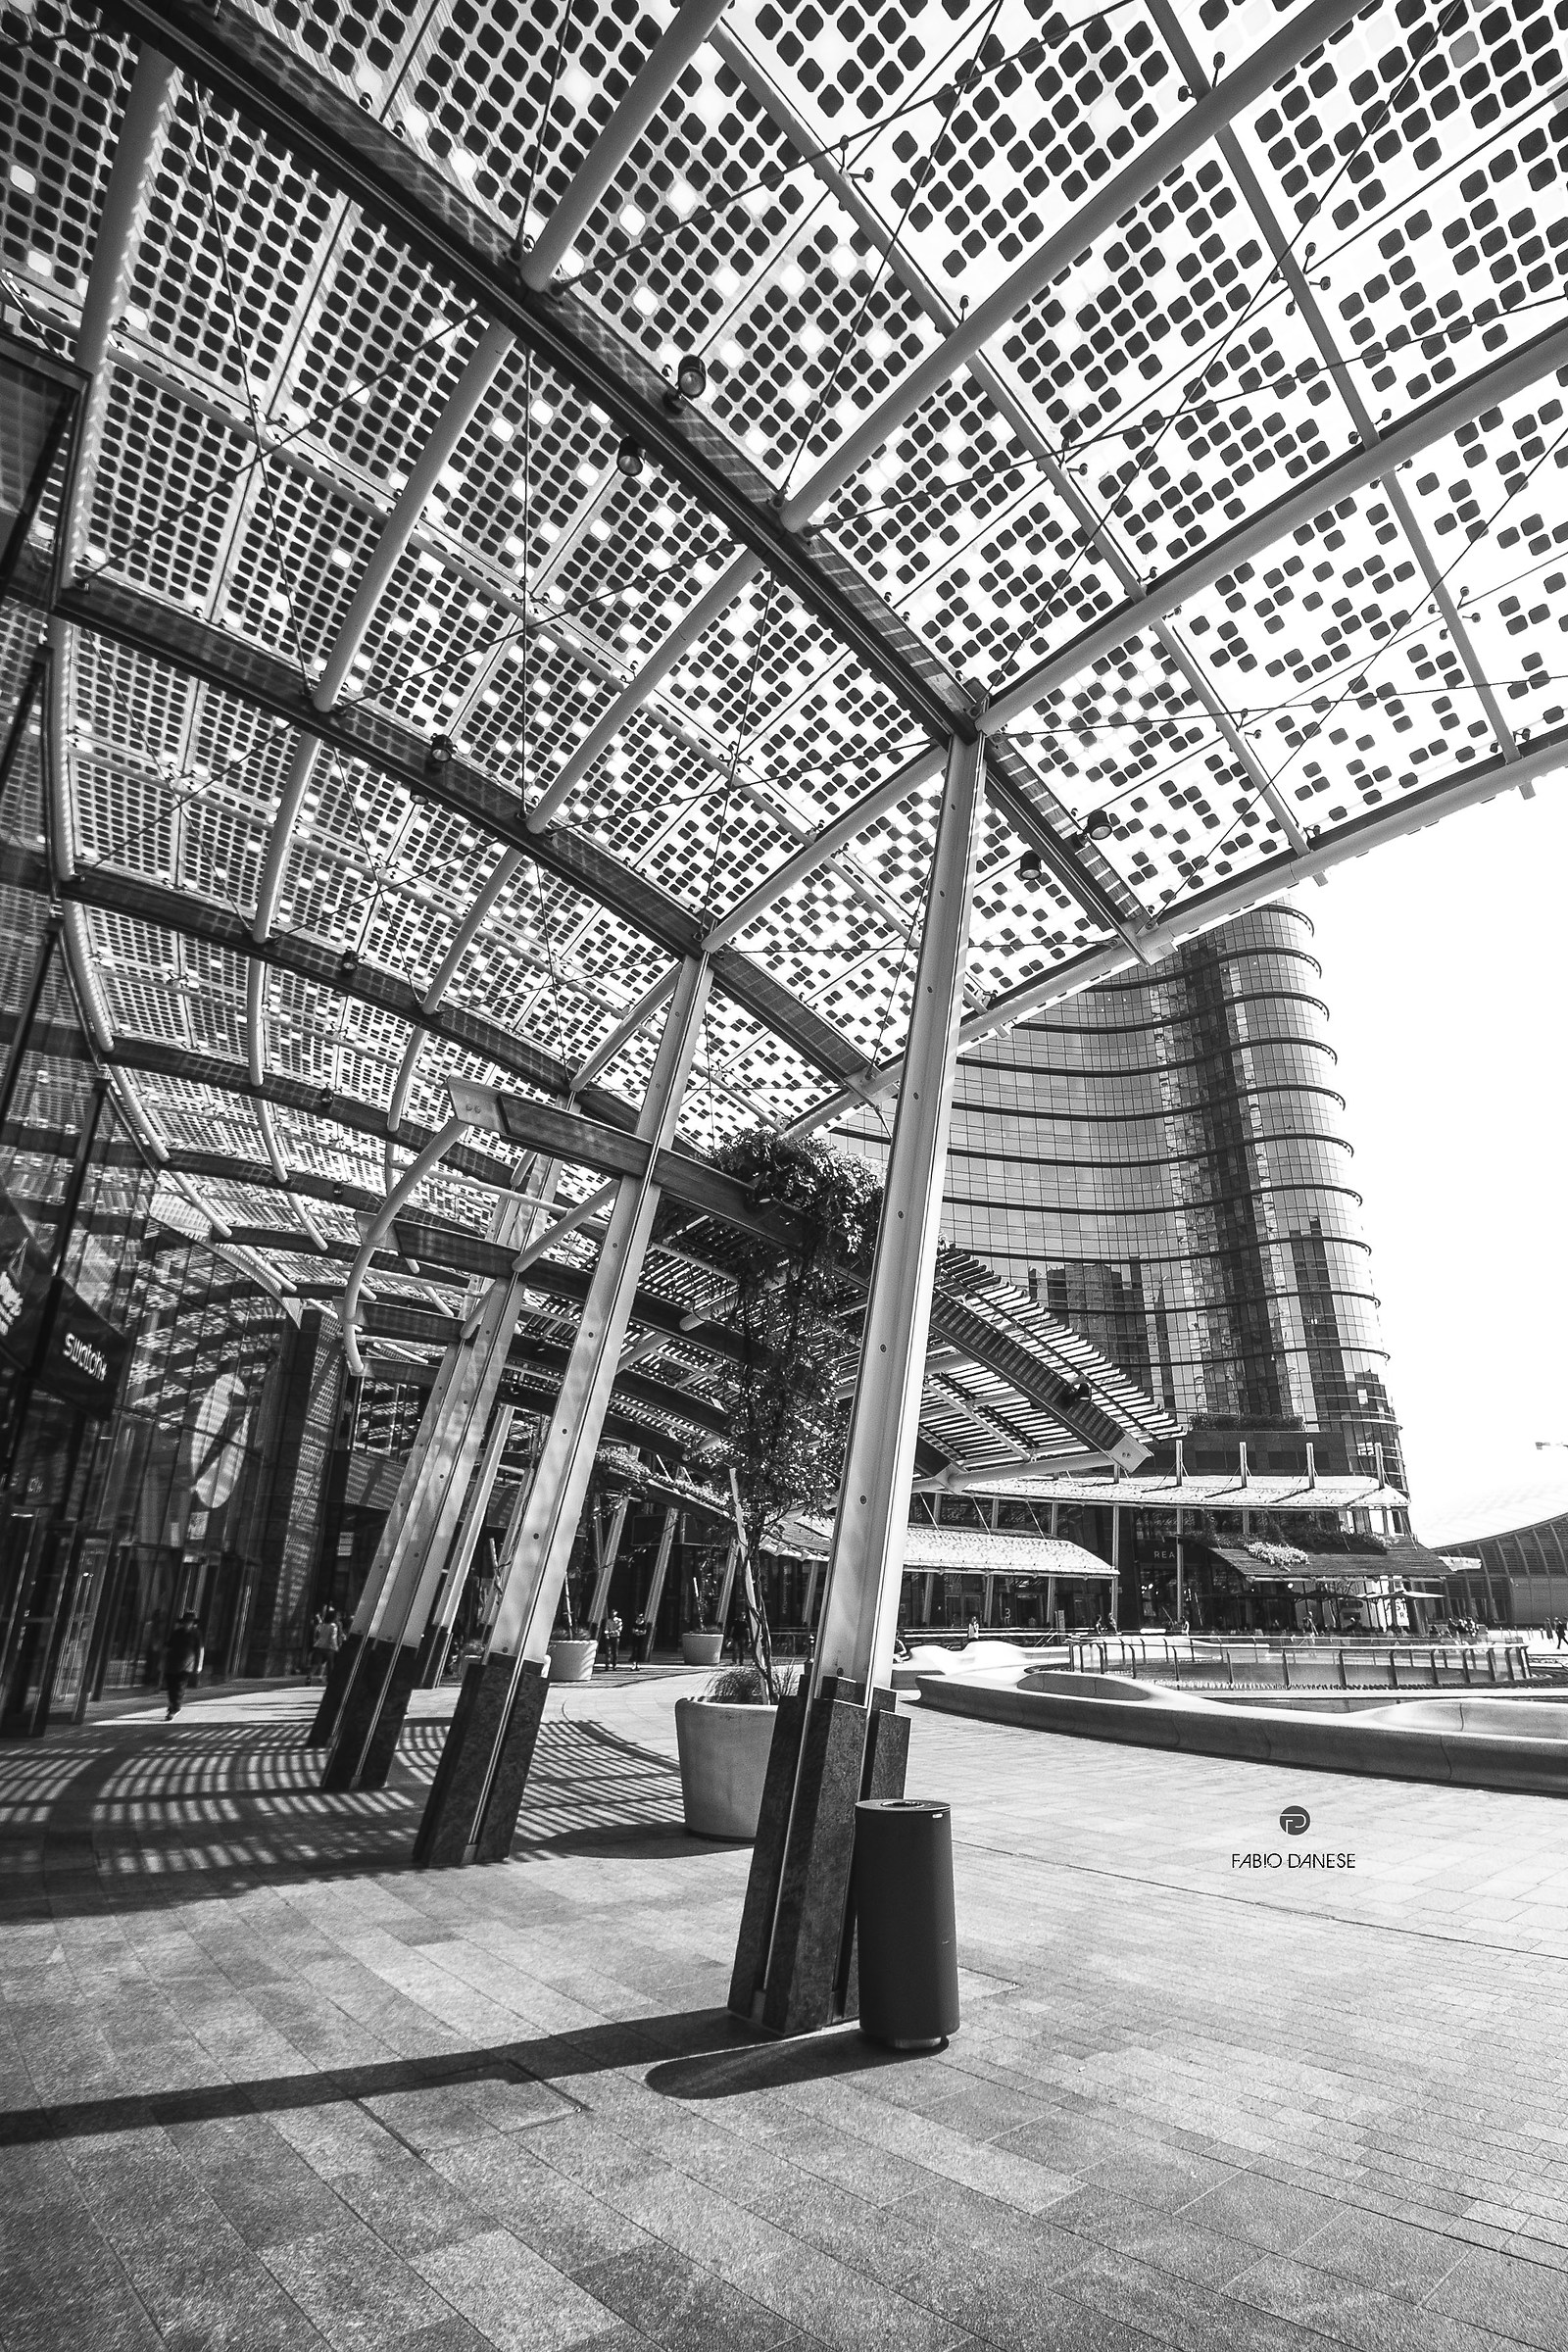 Perspectives in Piazza Gae Aulenti...